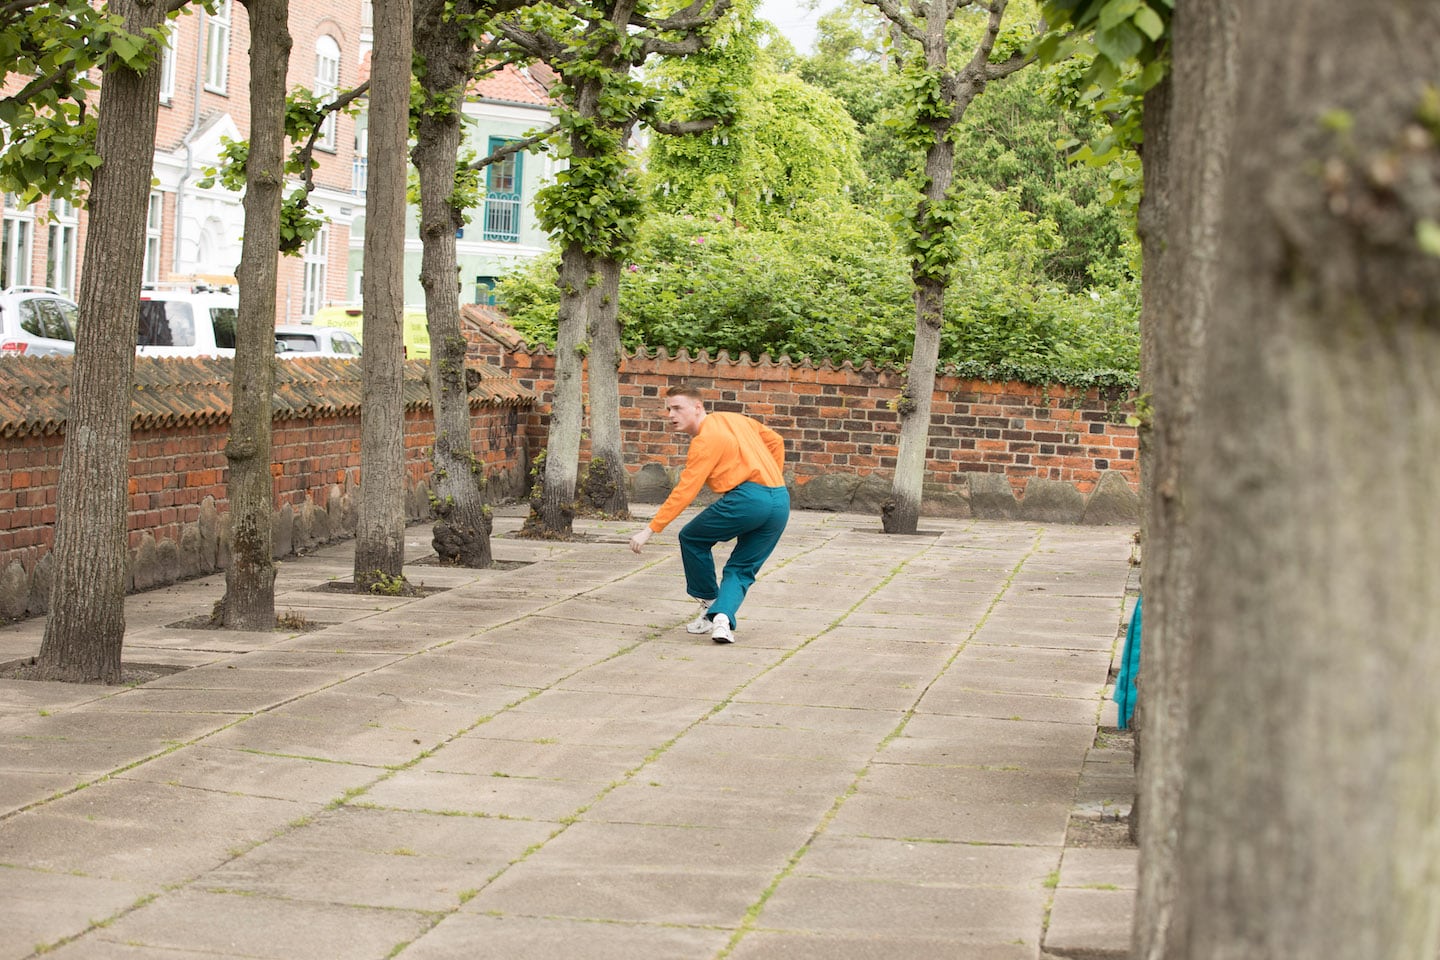 Man in orange top and turquoise trousers is running away down a paved treet lined with green trees.